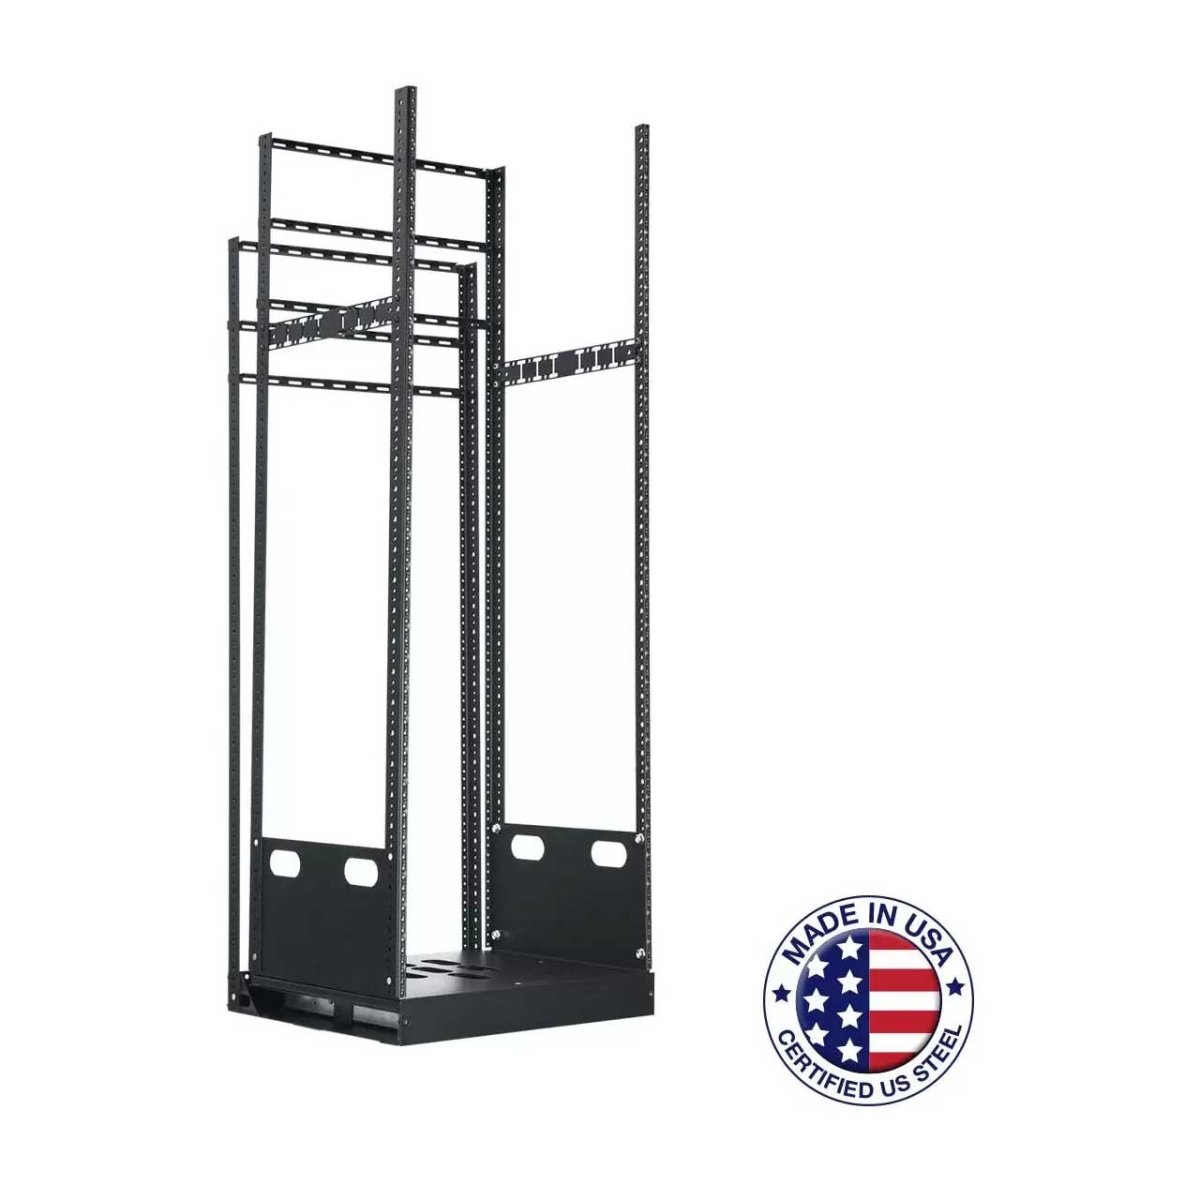 Picture of Lowell Manufacturing LMC-LPTR4-3019 LPTR4-3019 30RU Pull & Turn Millwork Rack with Four Support Rails - 19 in. Deep